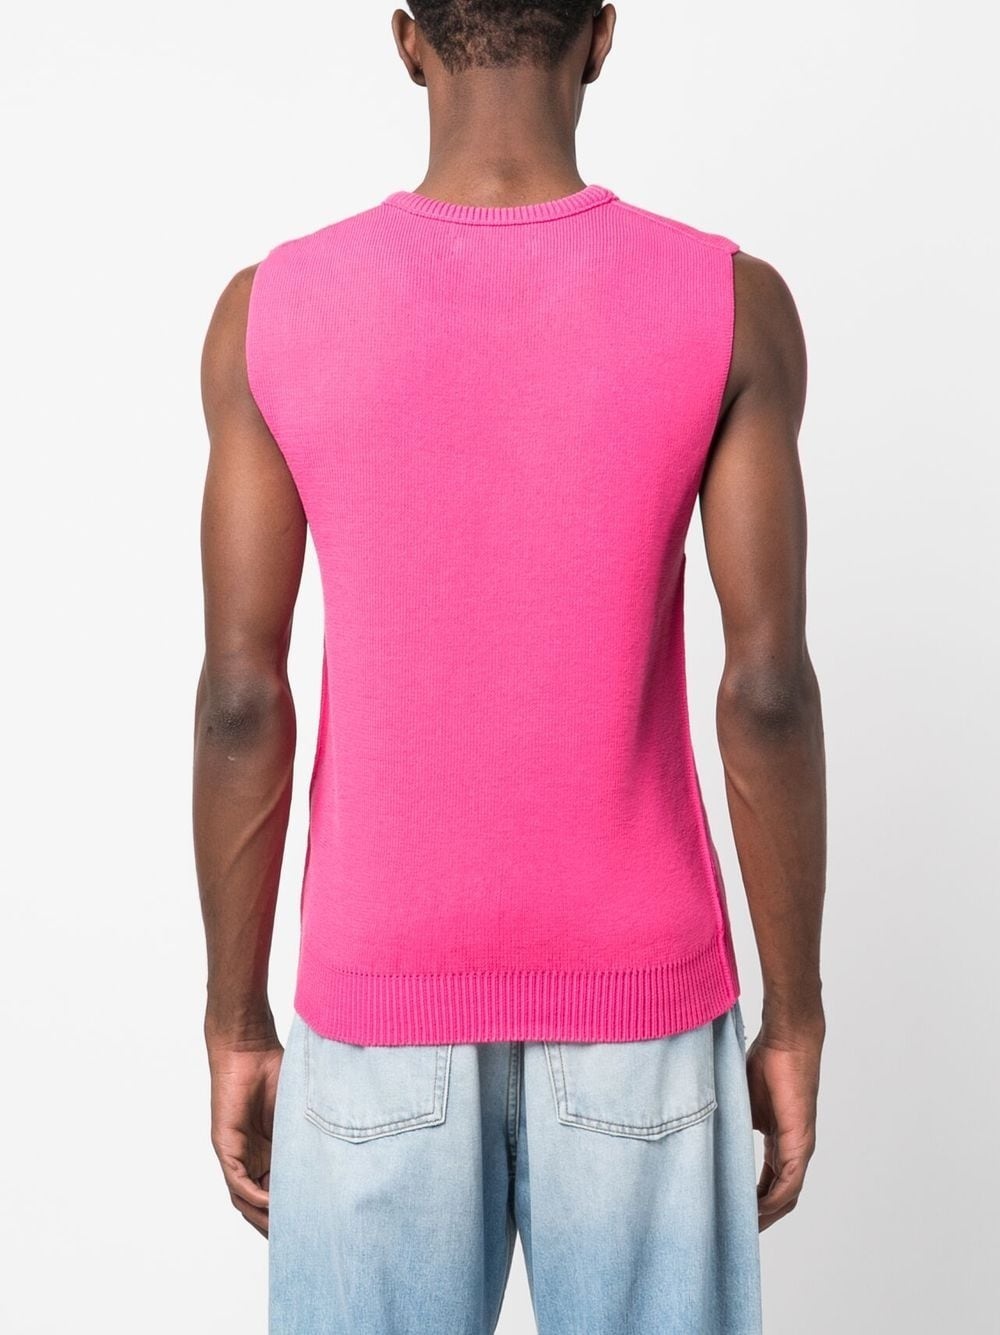 crew-neck knitted vest - 4